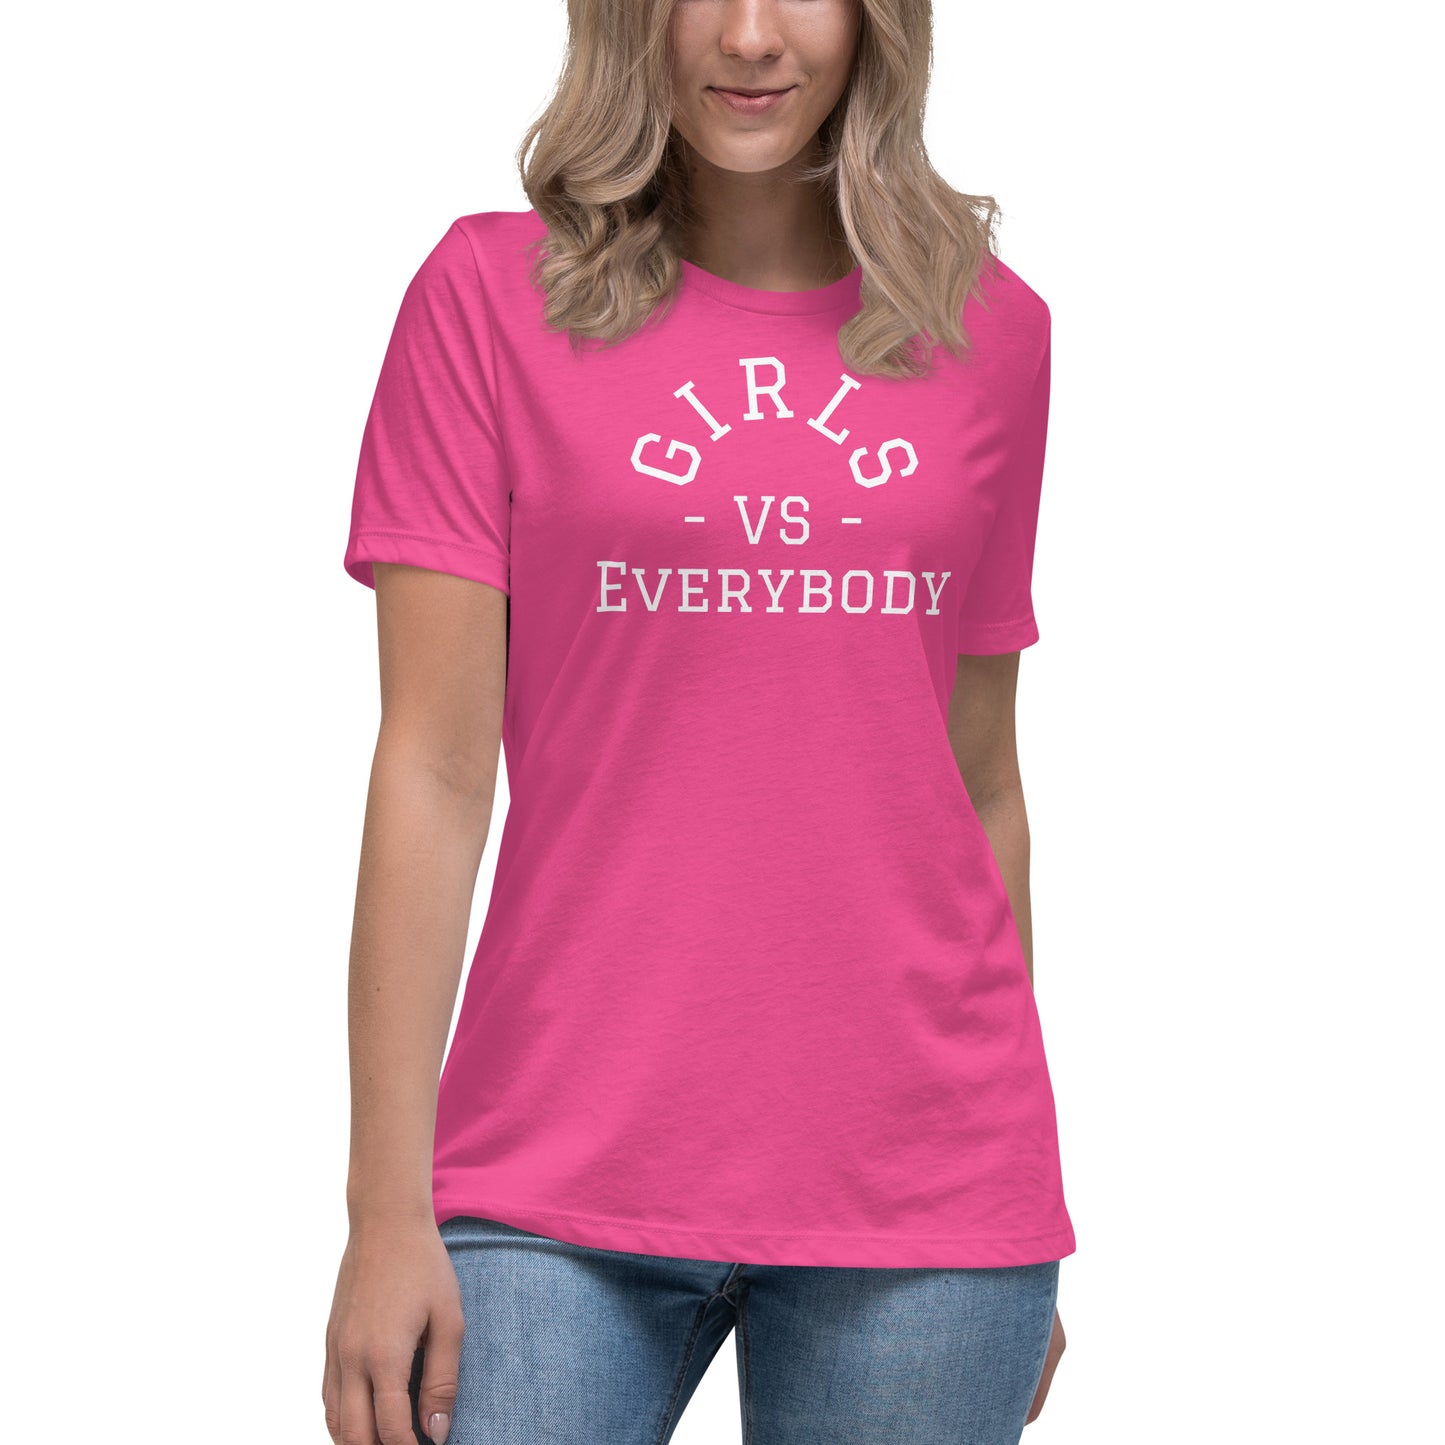 Best women's berry-colored short sleeve graphic tee shirt that says "Girls VS Everybody"